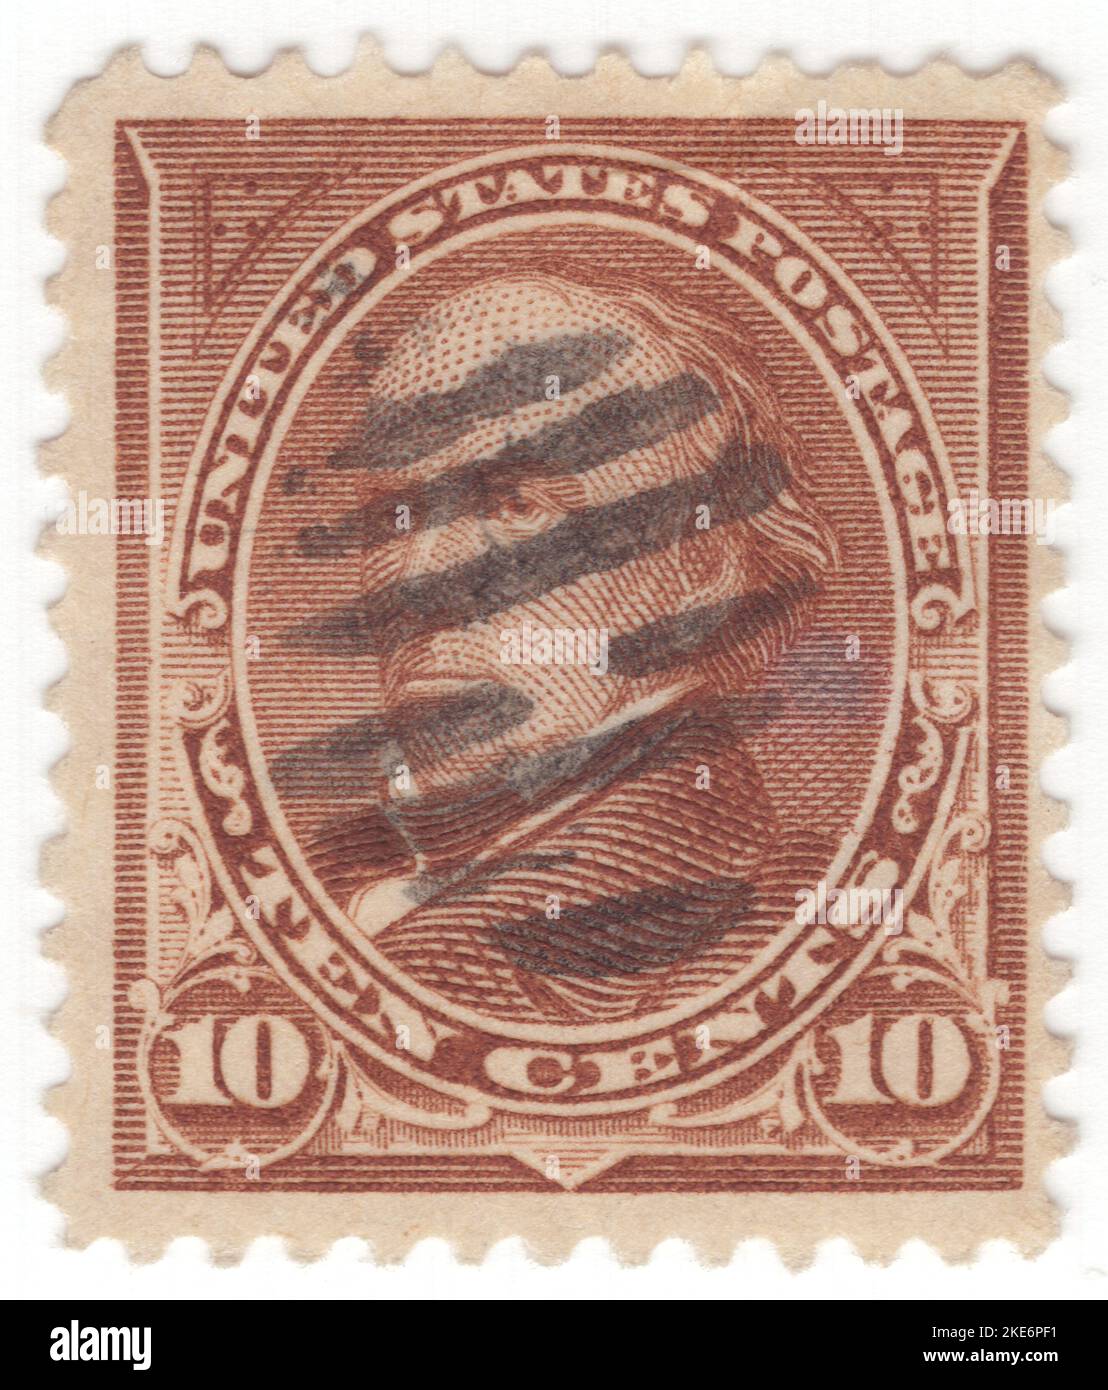 USA - 1897: An 10 cents orange-brown postage stamp depicting portrait of Daniel Webster, American lawyer and statesman who represented New Hampshire and Massachusetts in the U.S. Congress and served as the U.S. Secretary of State under Presidents William Henry Harrison, John Tyler, and Millard Fillmore. Webster was one of the most prominent American lawyers of the 19th century, and argued over 200 cases before the U.S. Supreme Court between 1814 and his death in 1852. During his life, he was a member of the Federalist Party, the National Republican Party, and the Whig Party Stock Photo